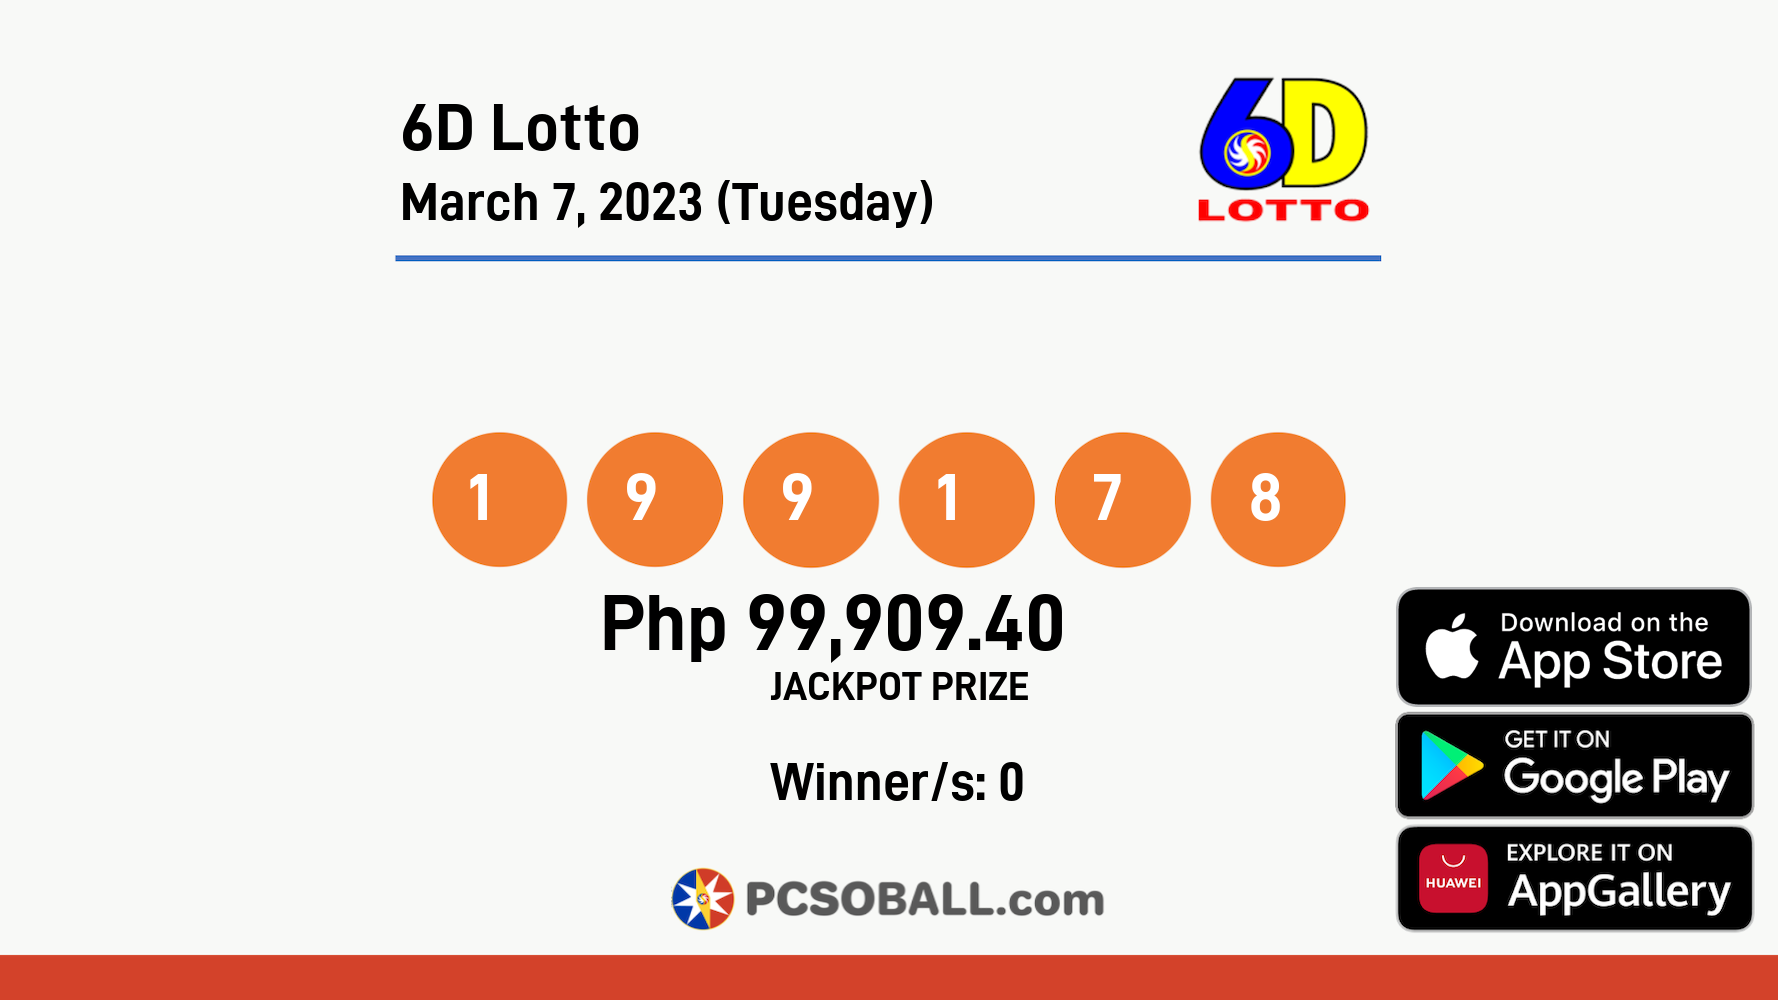 6D Lotto March 7, 2023 (Tuesday) Result